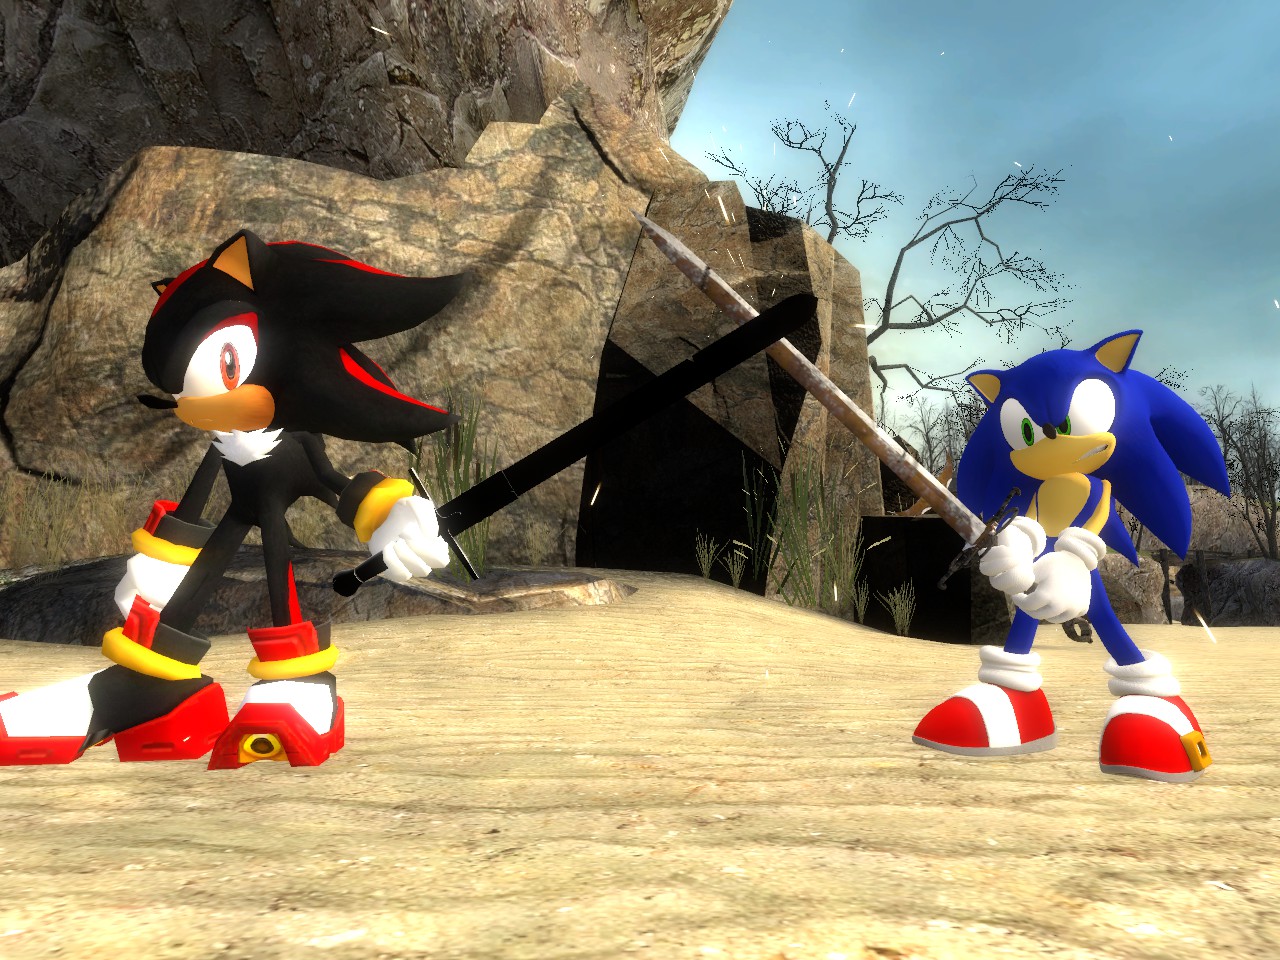 SONIC VS SHADOW! - Stick Fight The Game! 